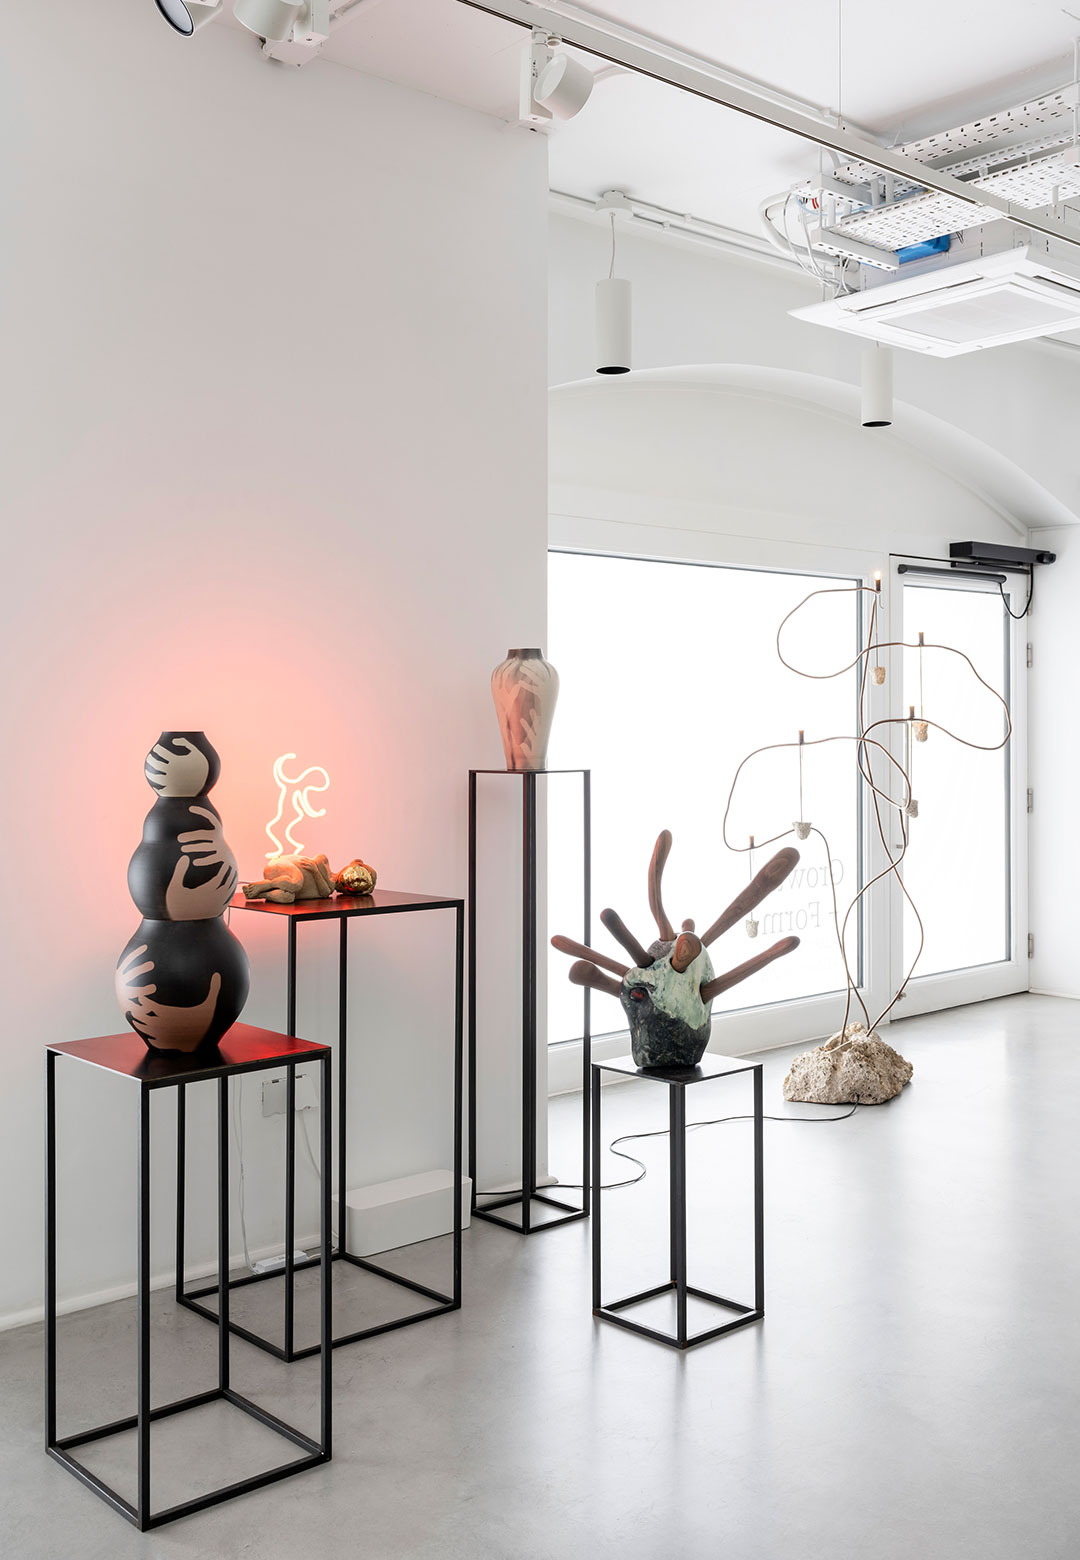 The ‘Growth + Form’ group exhibition celebrates 15 years of Gallery FUMI